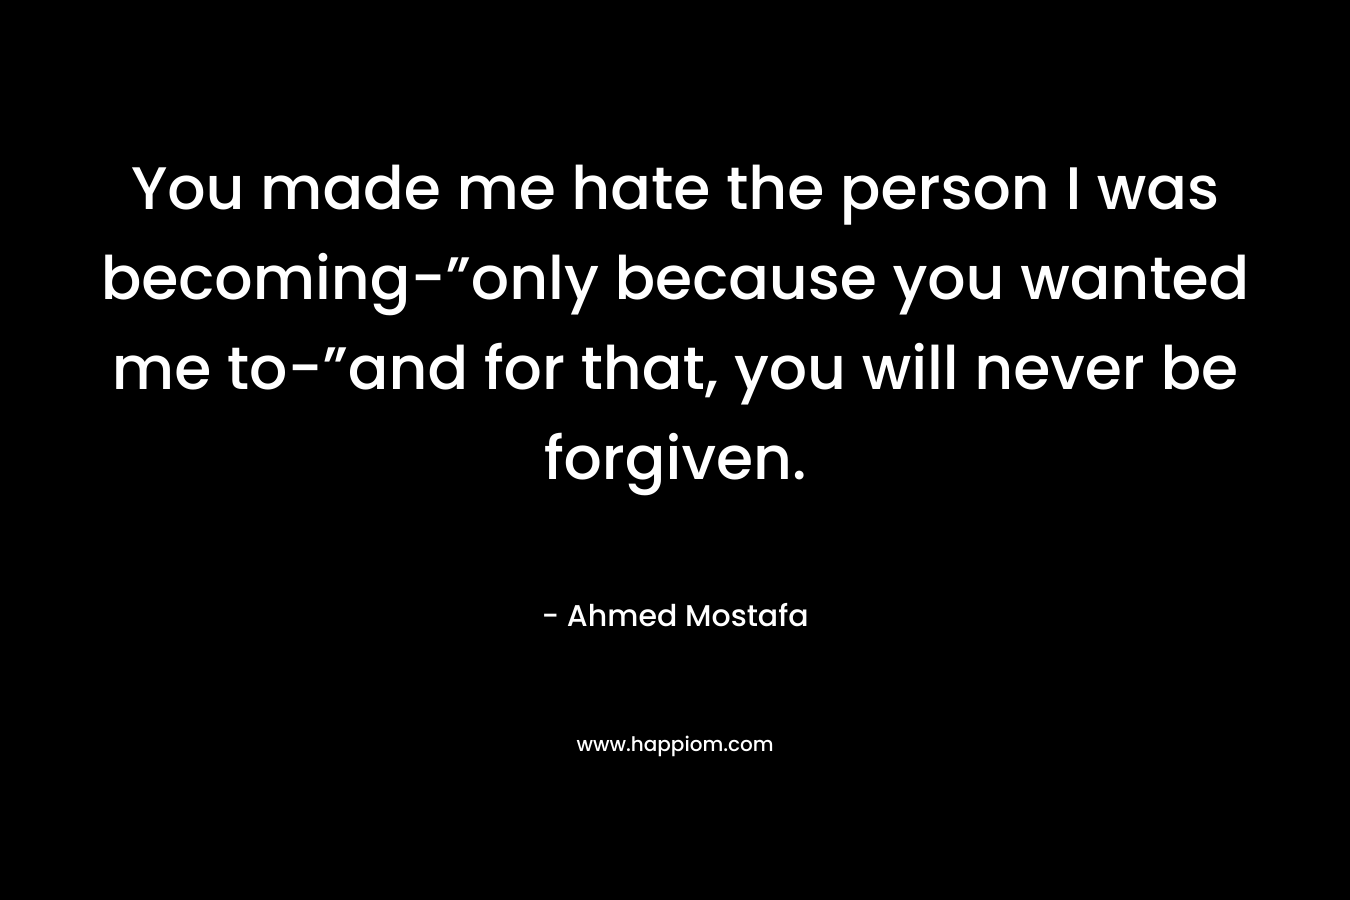 You made me hate the person I was becoming-”only because you wanted me to-”and for that, you will never be forgiven.